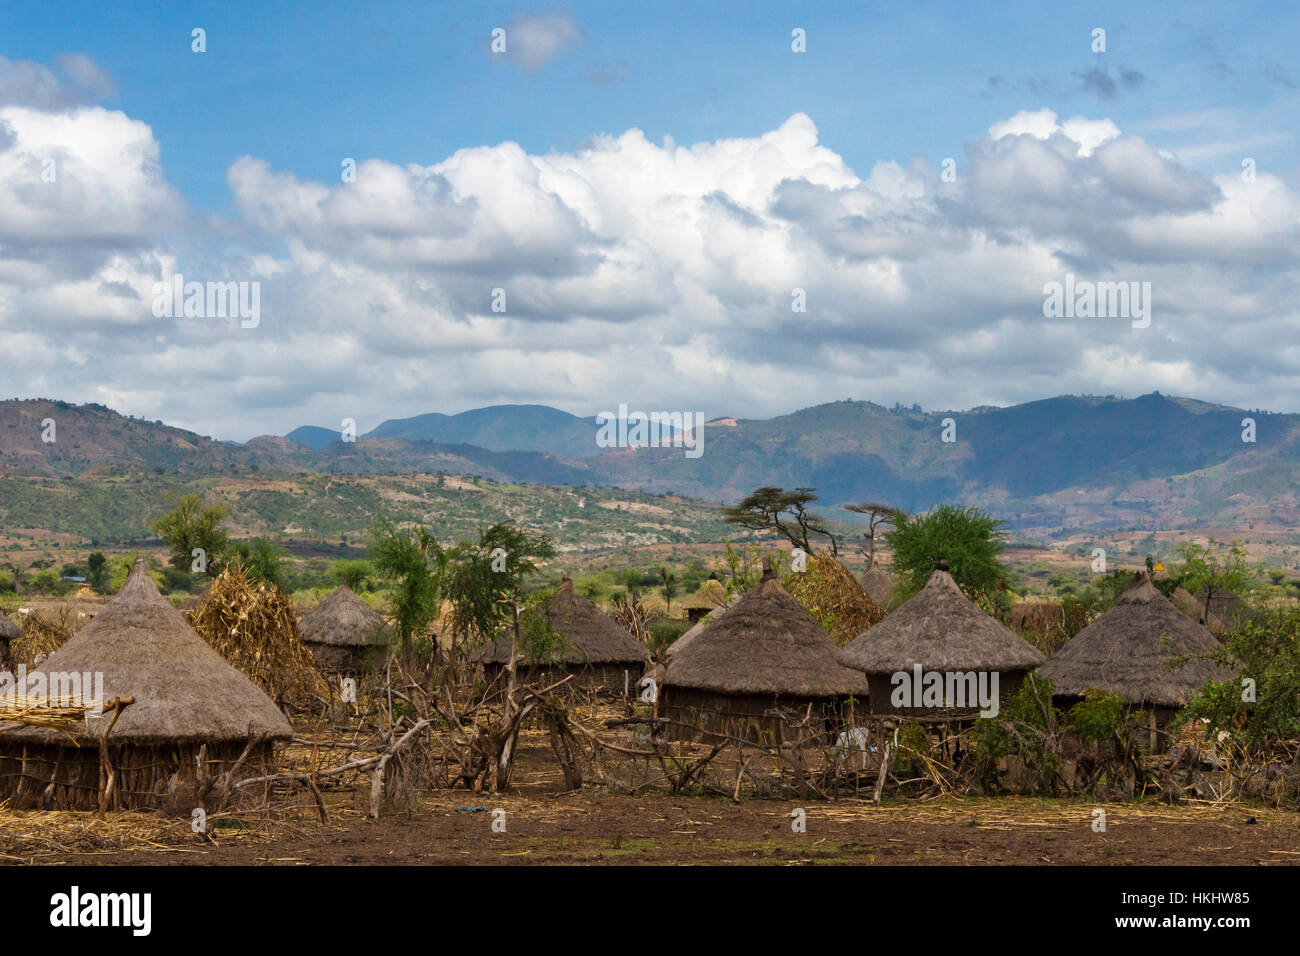 Traditional houses with thatched roof, Konso, Ethiopia Stock Photo